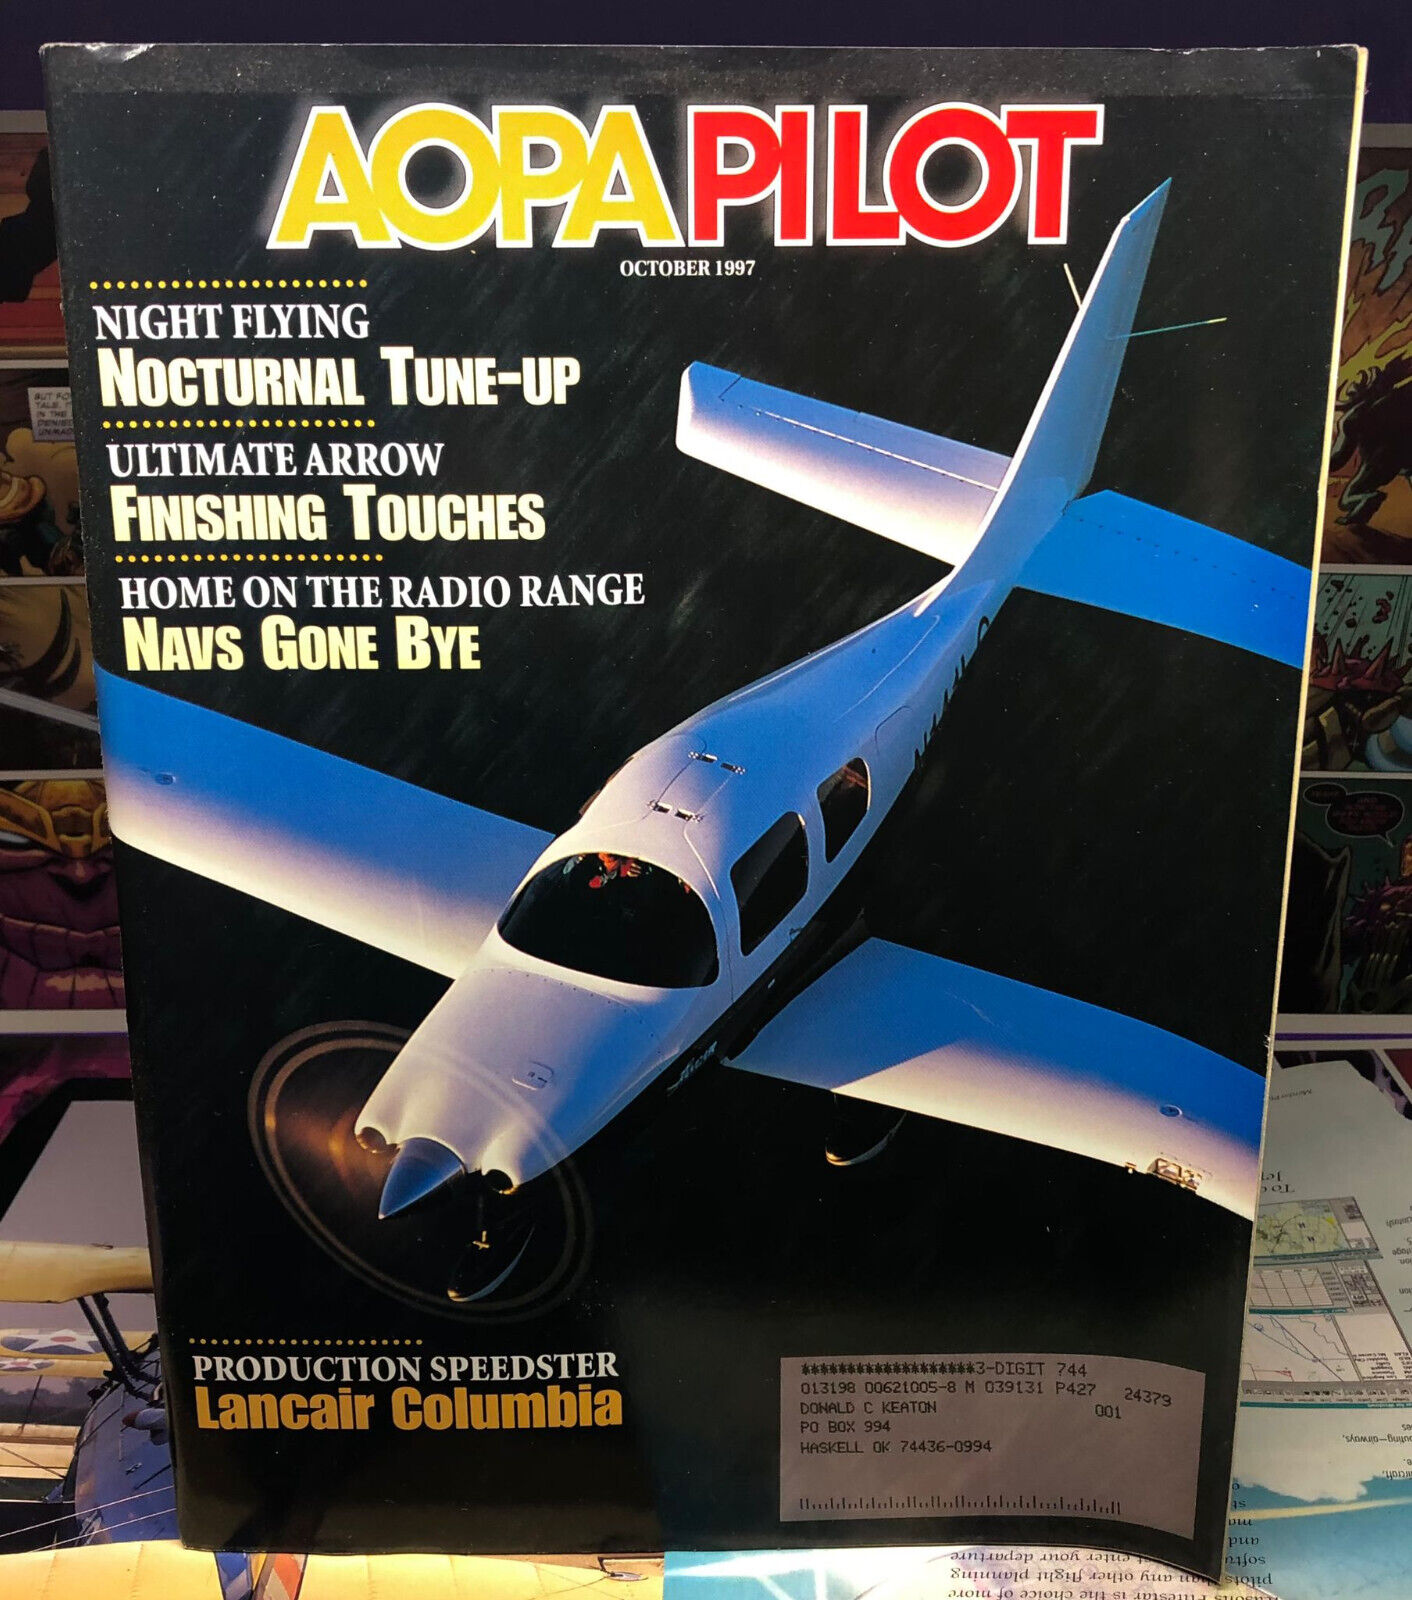 AOPA Pilot October 1997,  Aviation Magazine - Nocturnal Tune Up, Finishing Touch